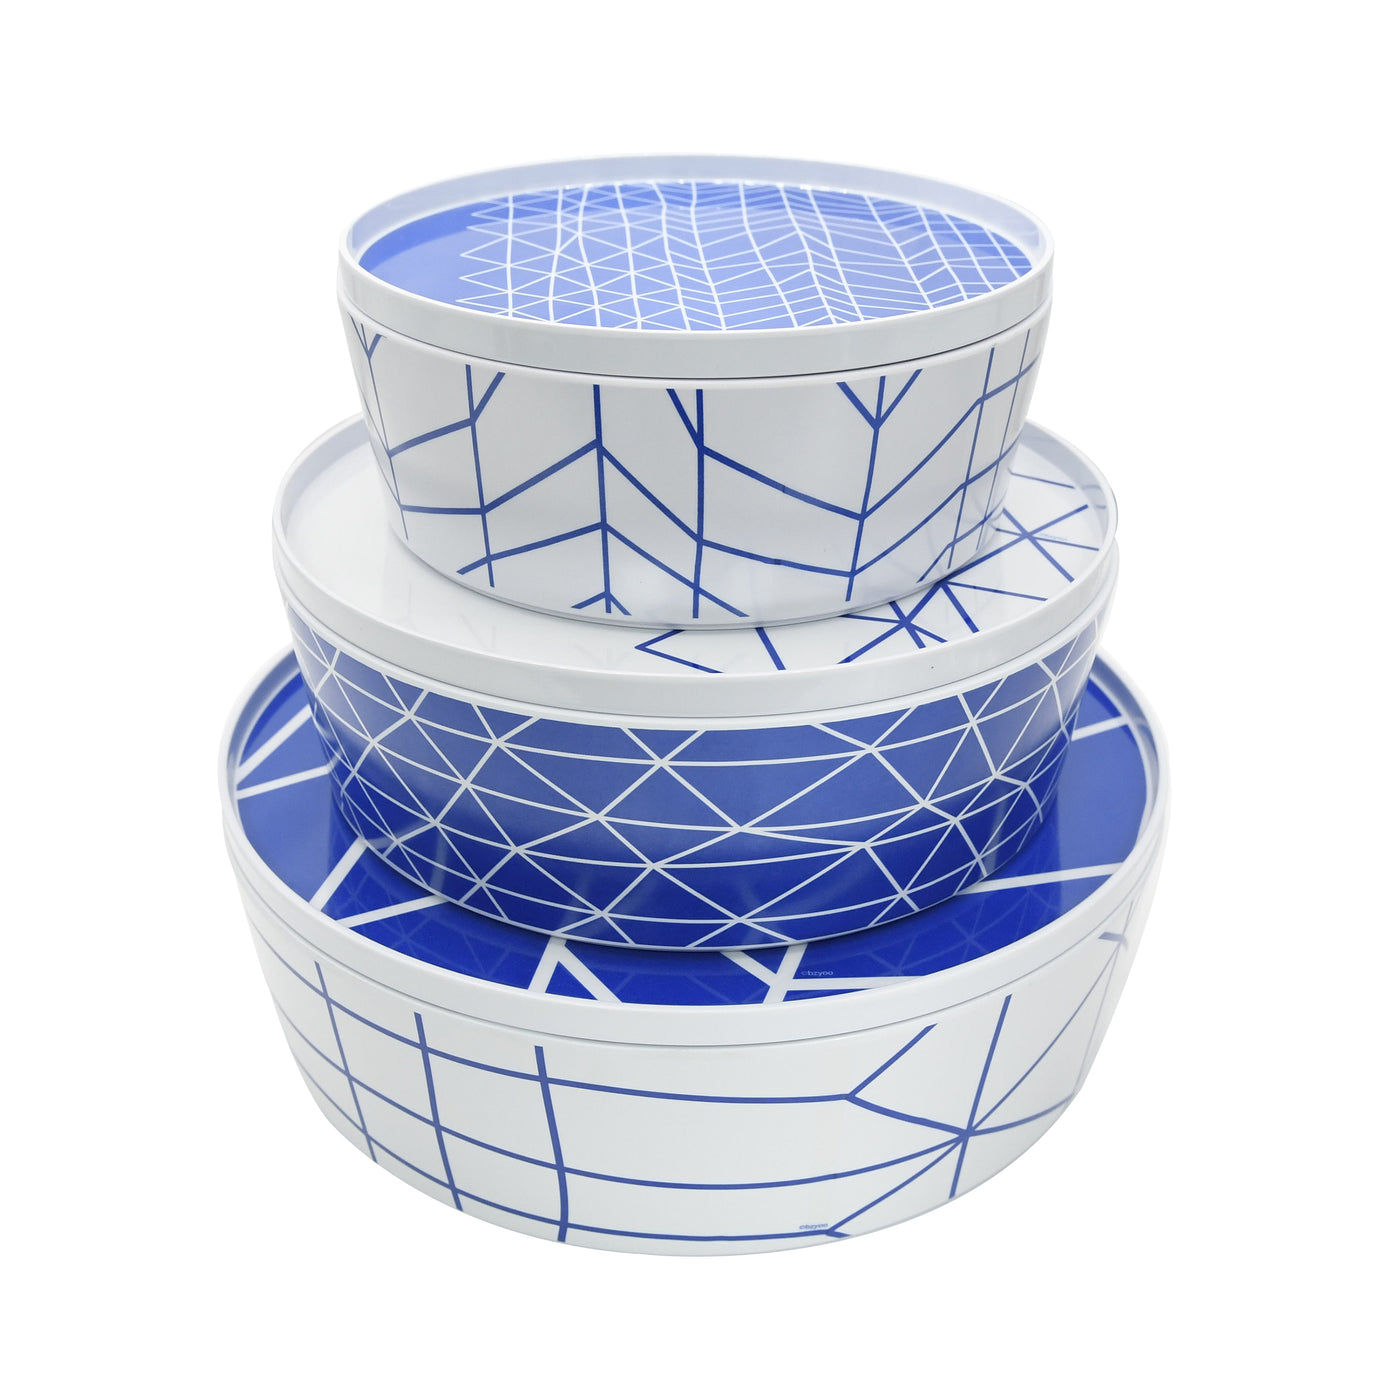 Spidy Melamine Serving Plate and Bowl Stackable Set